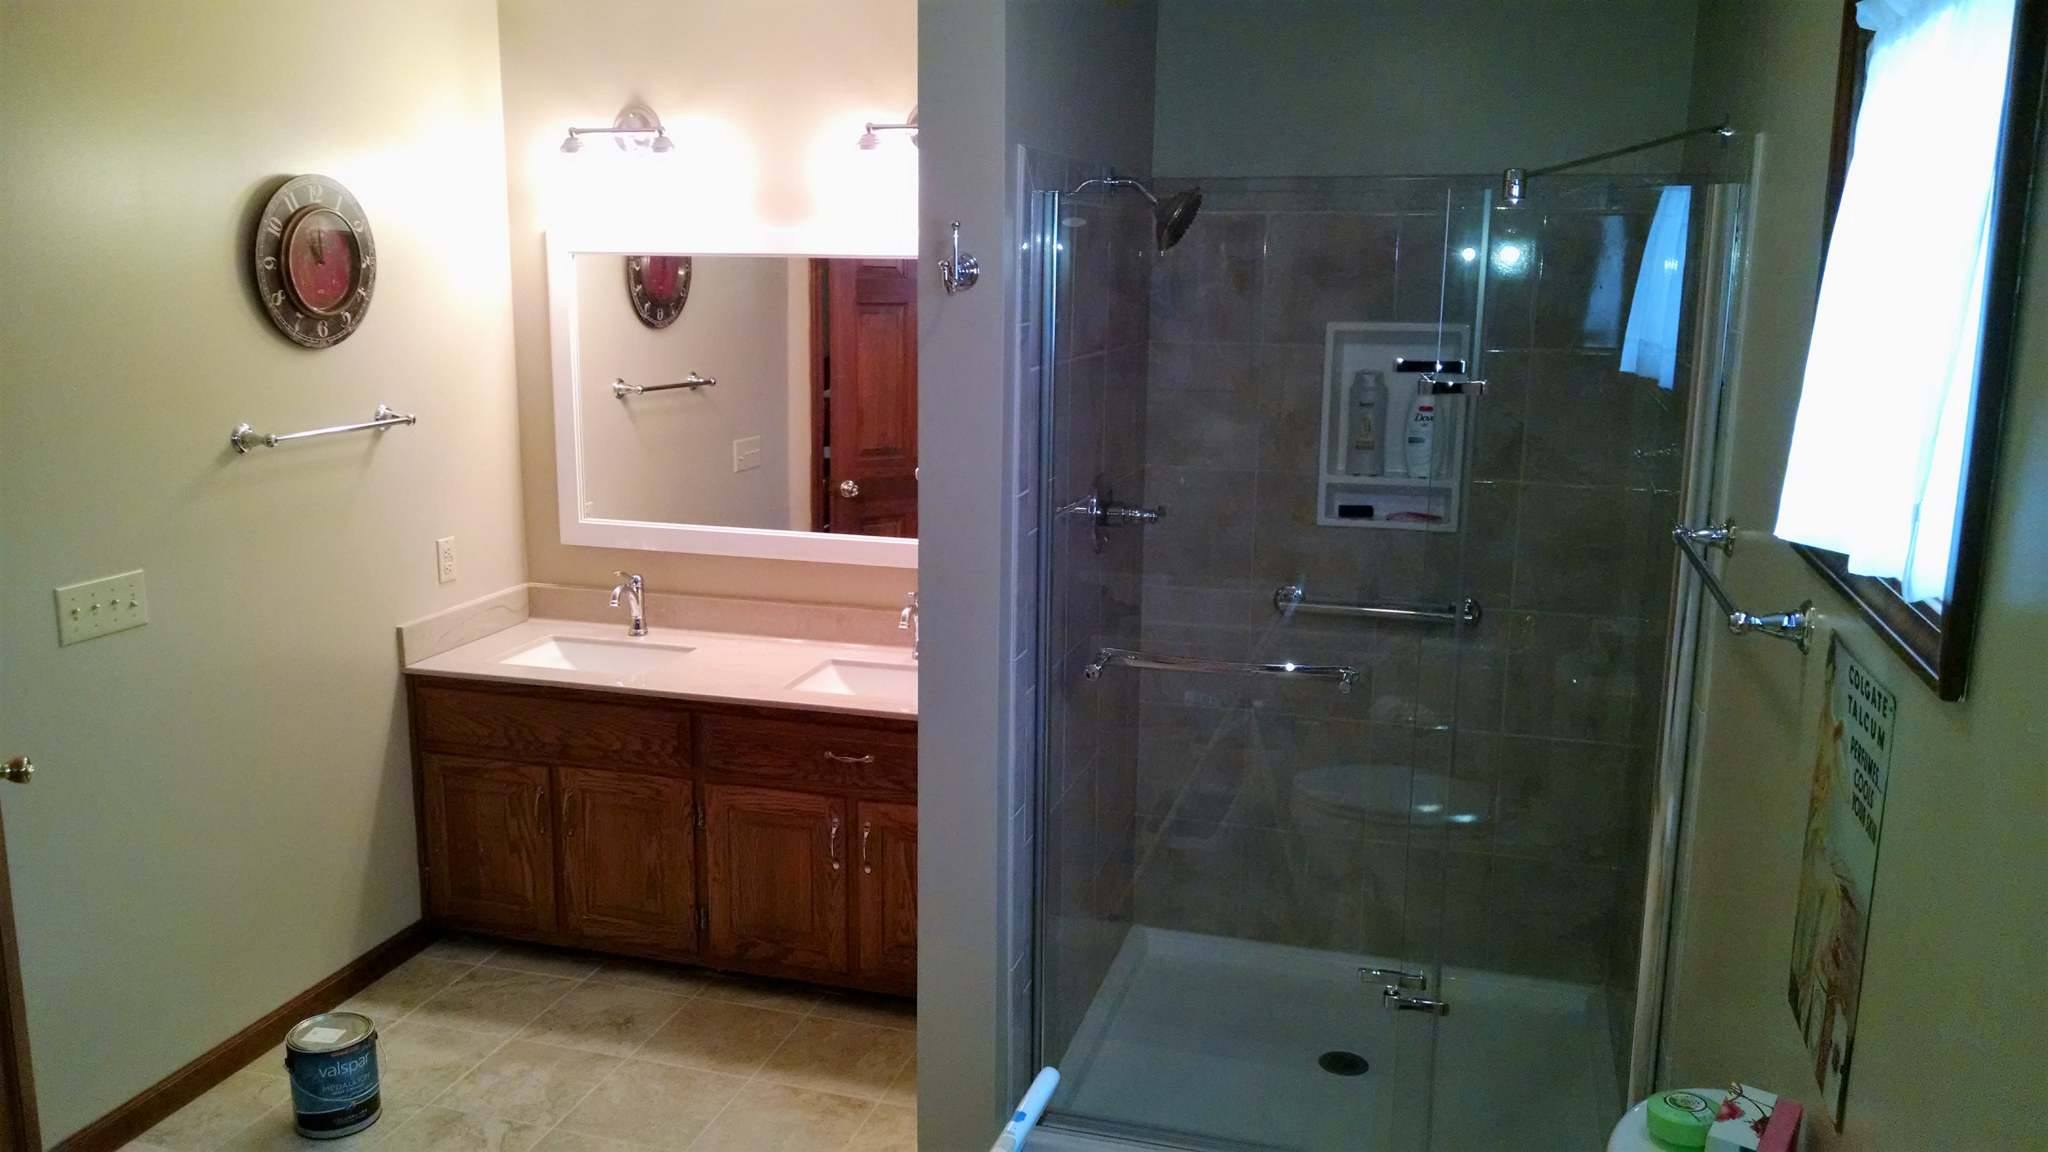 Skelley Construction Inc. - remodeled bathroom with standing shower and jack n jill sinks - Decatur, IL